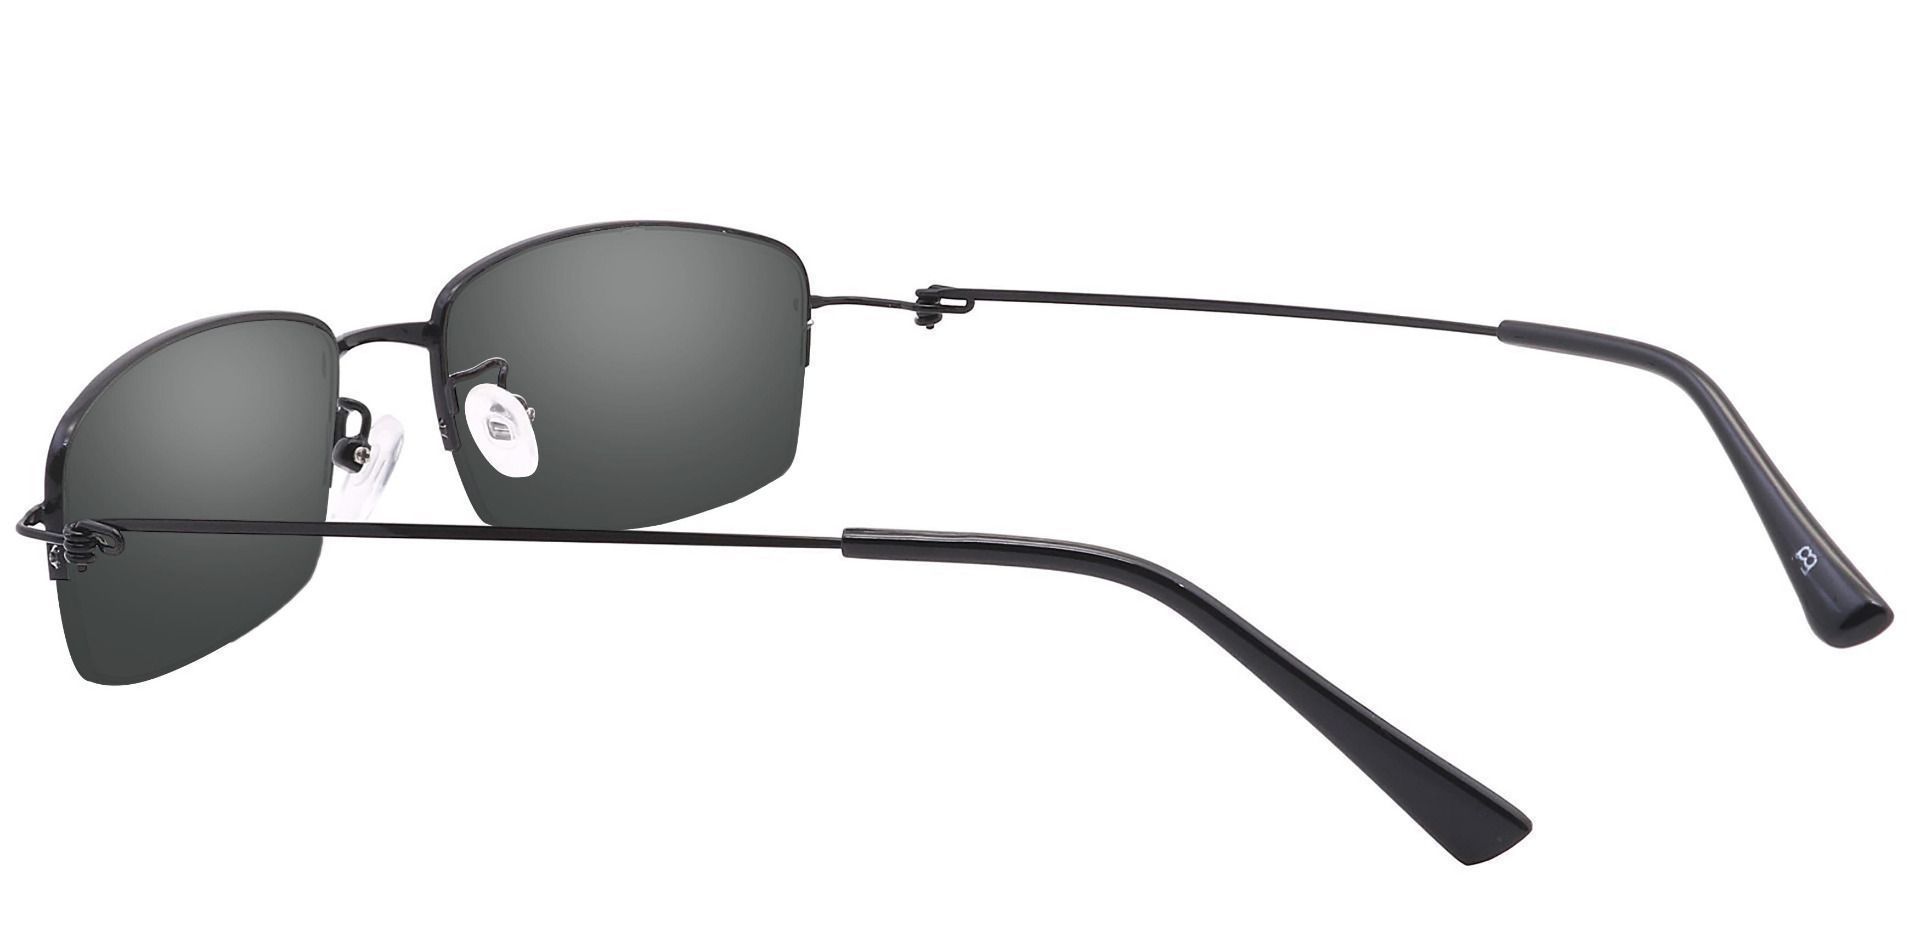 Wyoming Rectangle Non-Rx Sunglasses - Black Frame With Gray Lenses